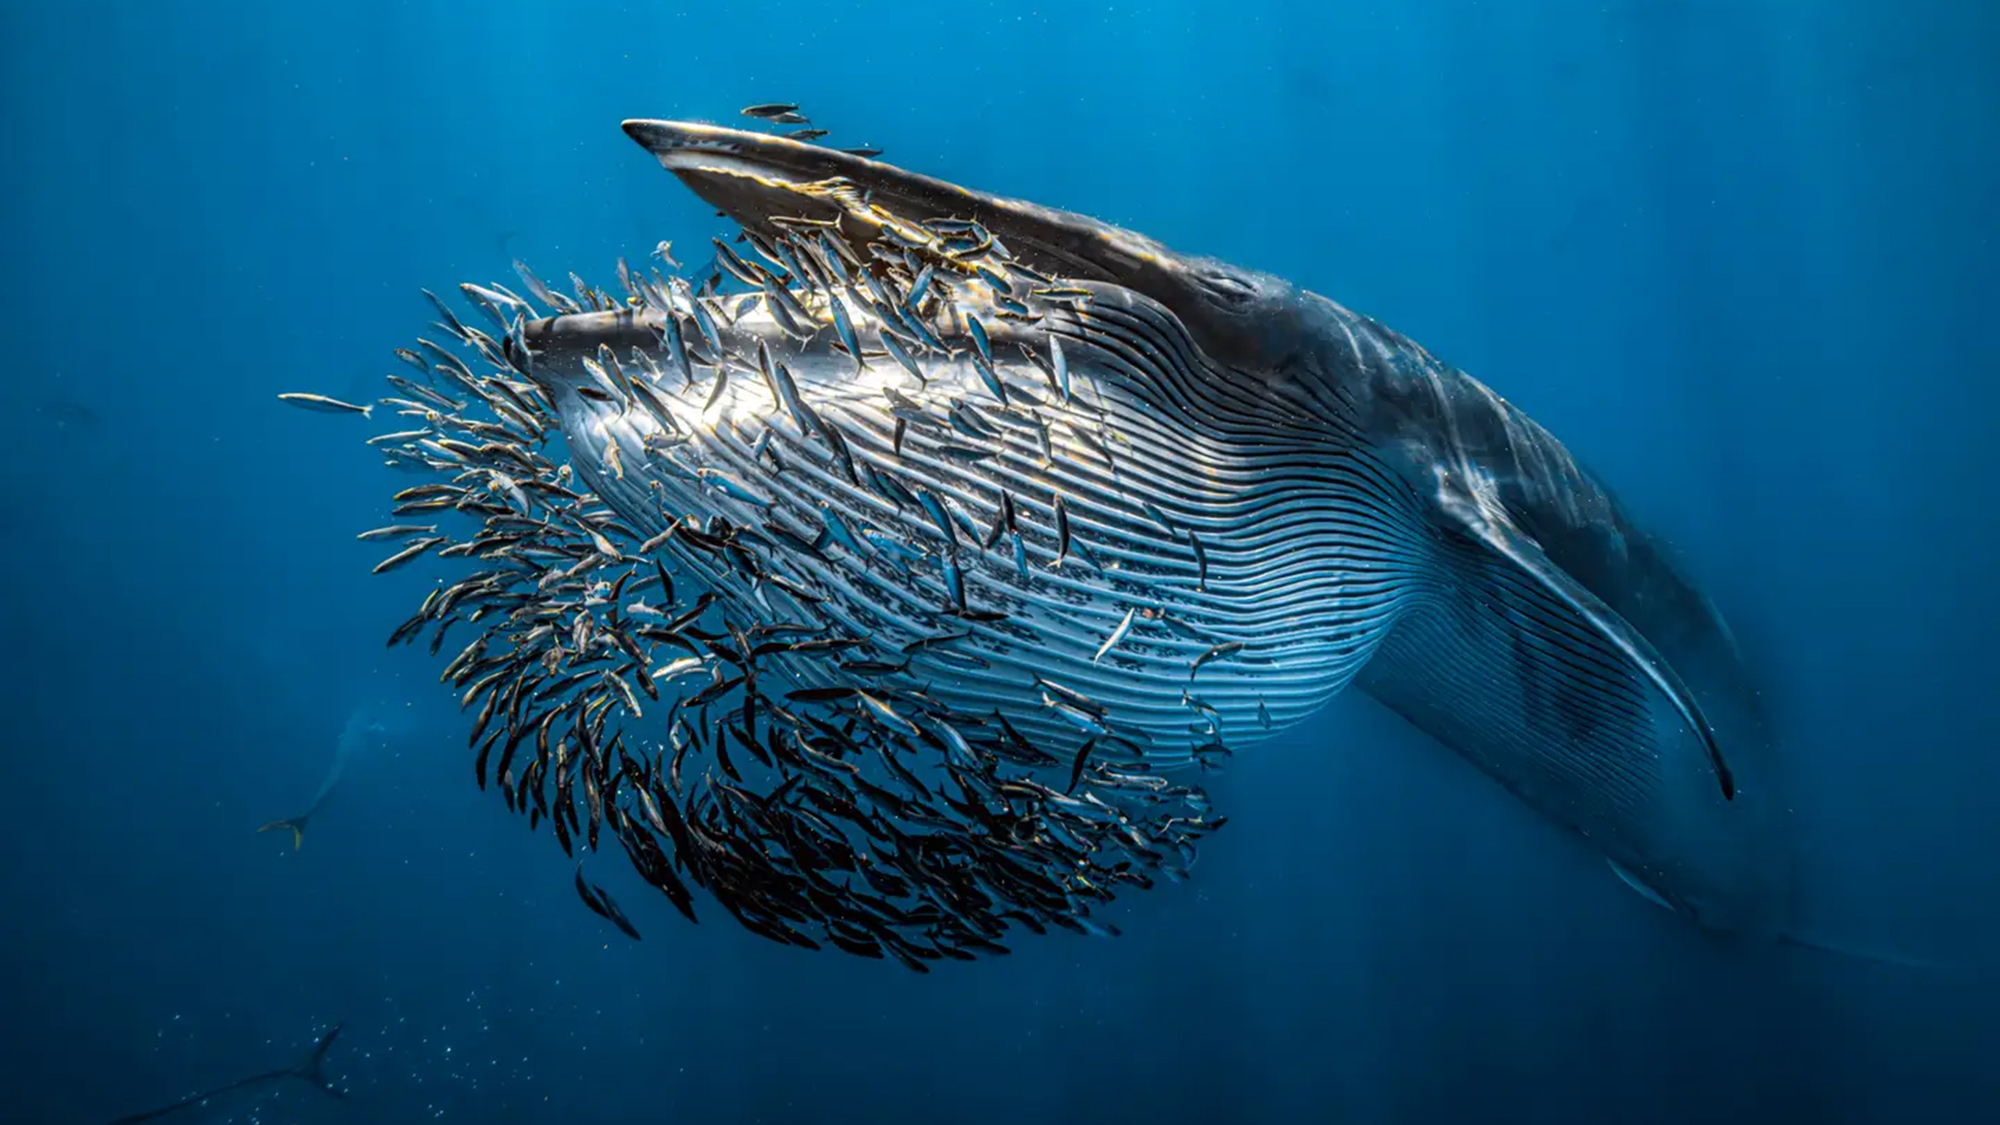 a school of sardines swarms the mouth of a whale